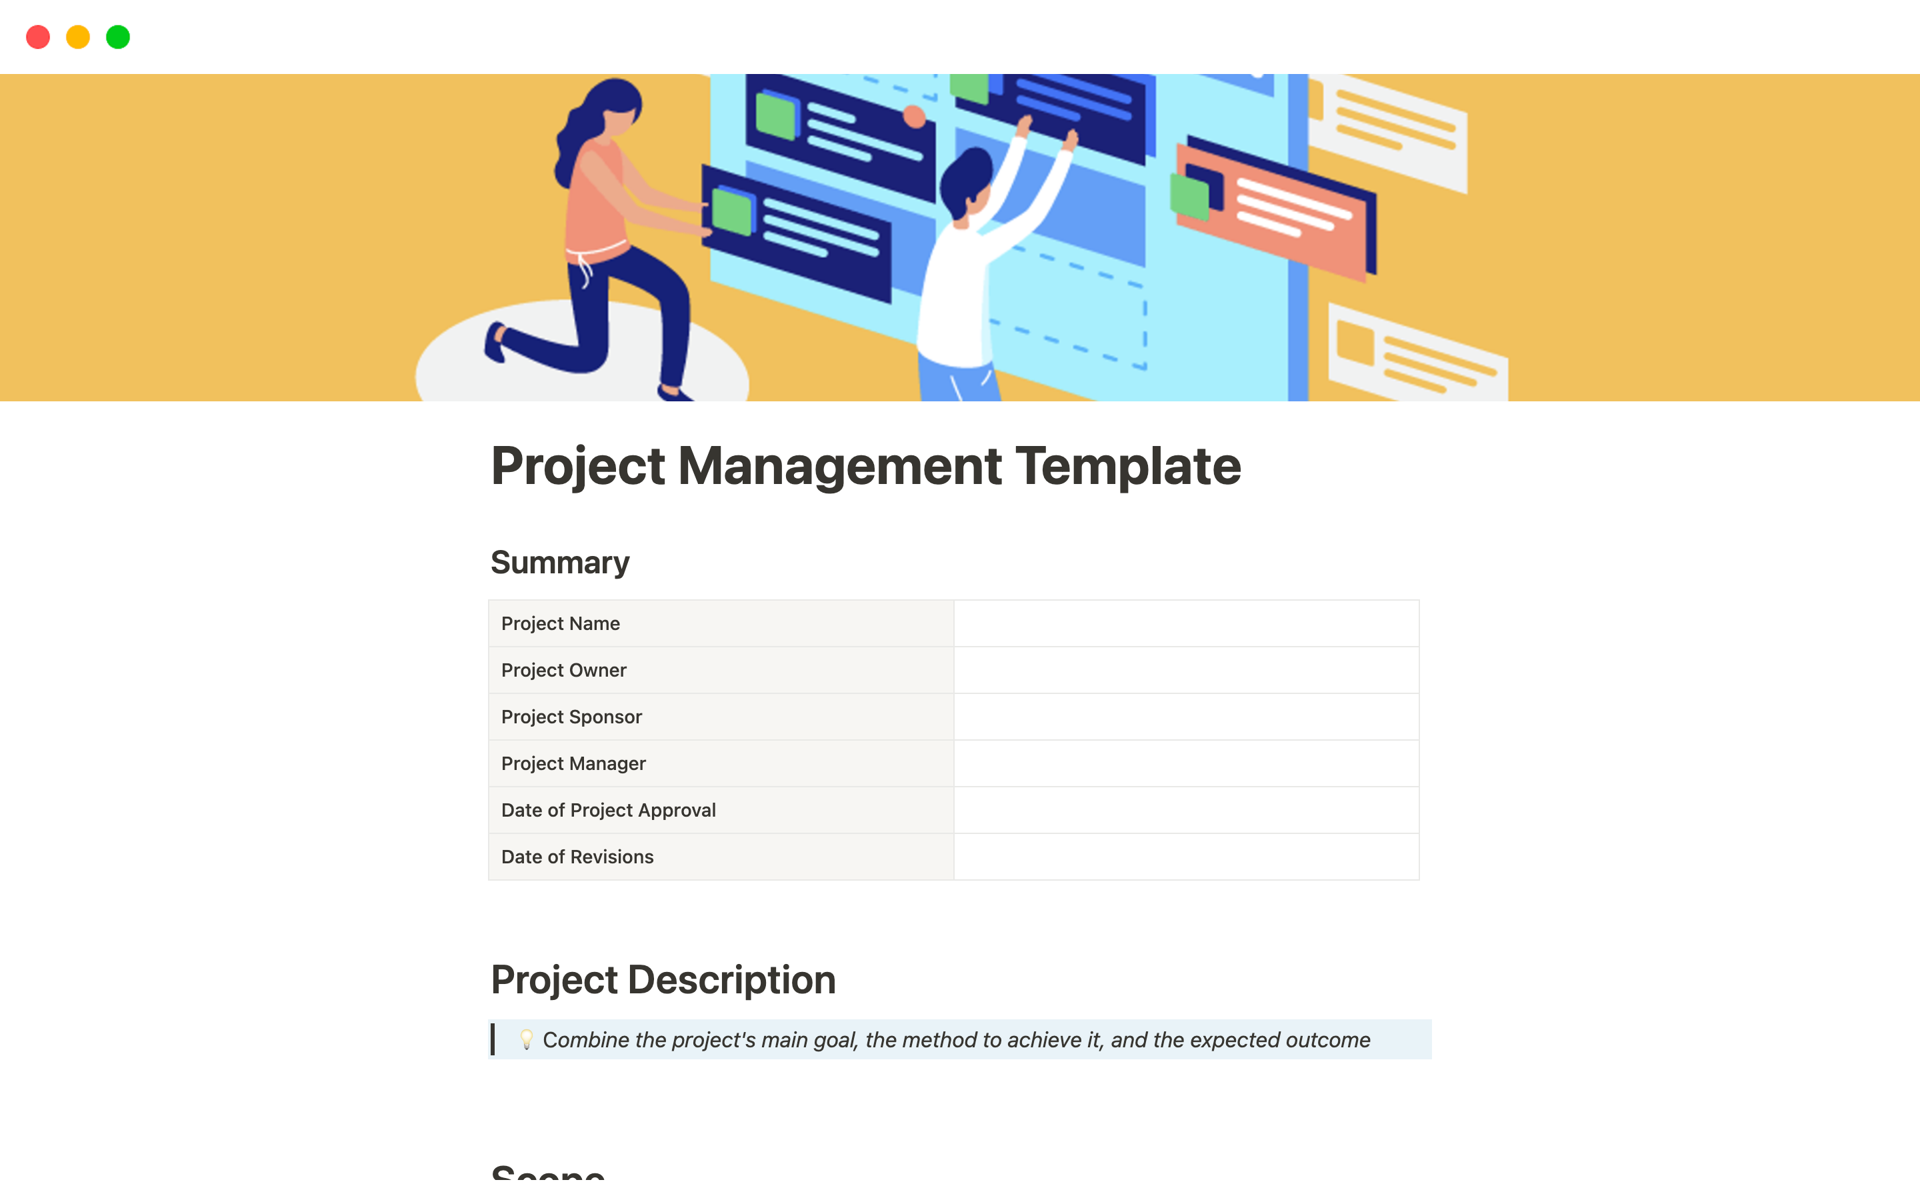 Project Management Summary | Notion Template